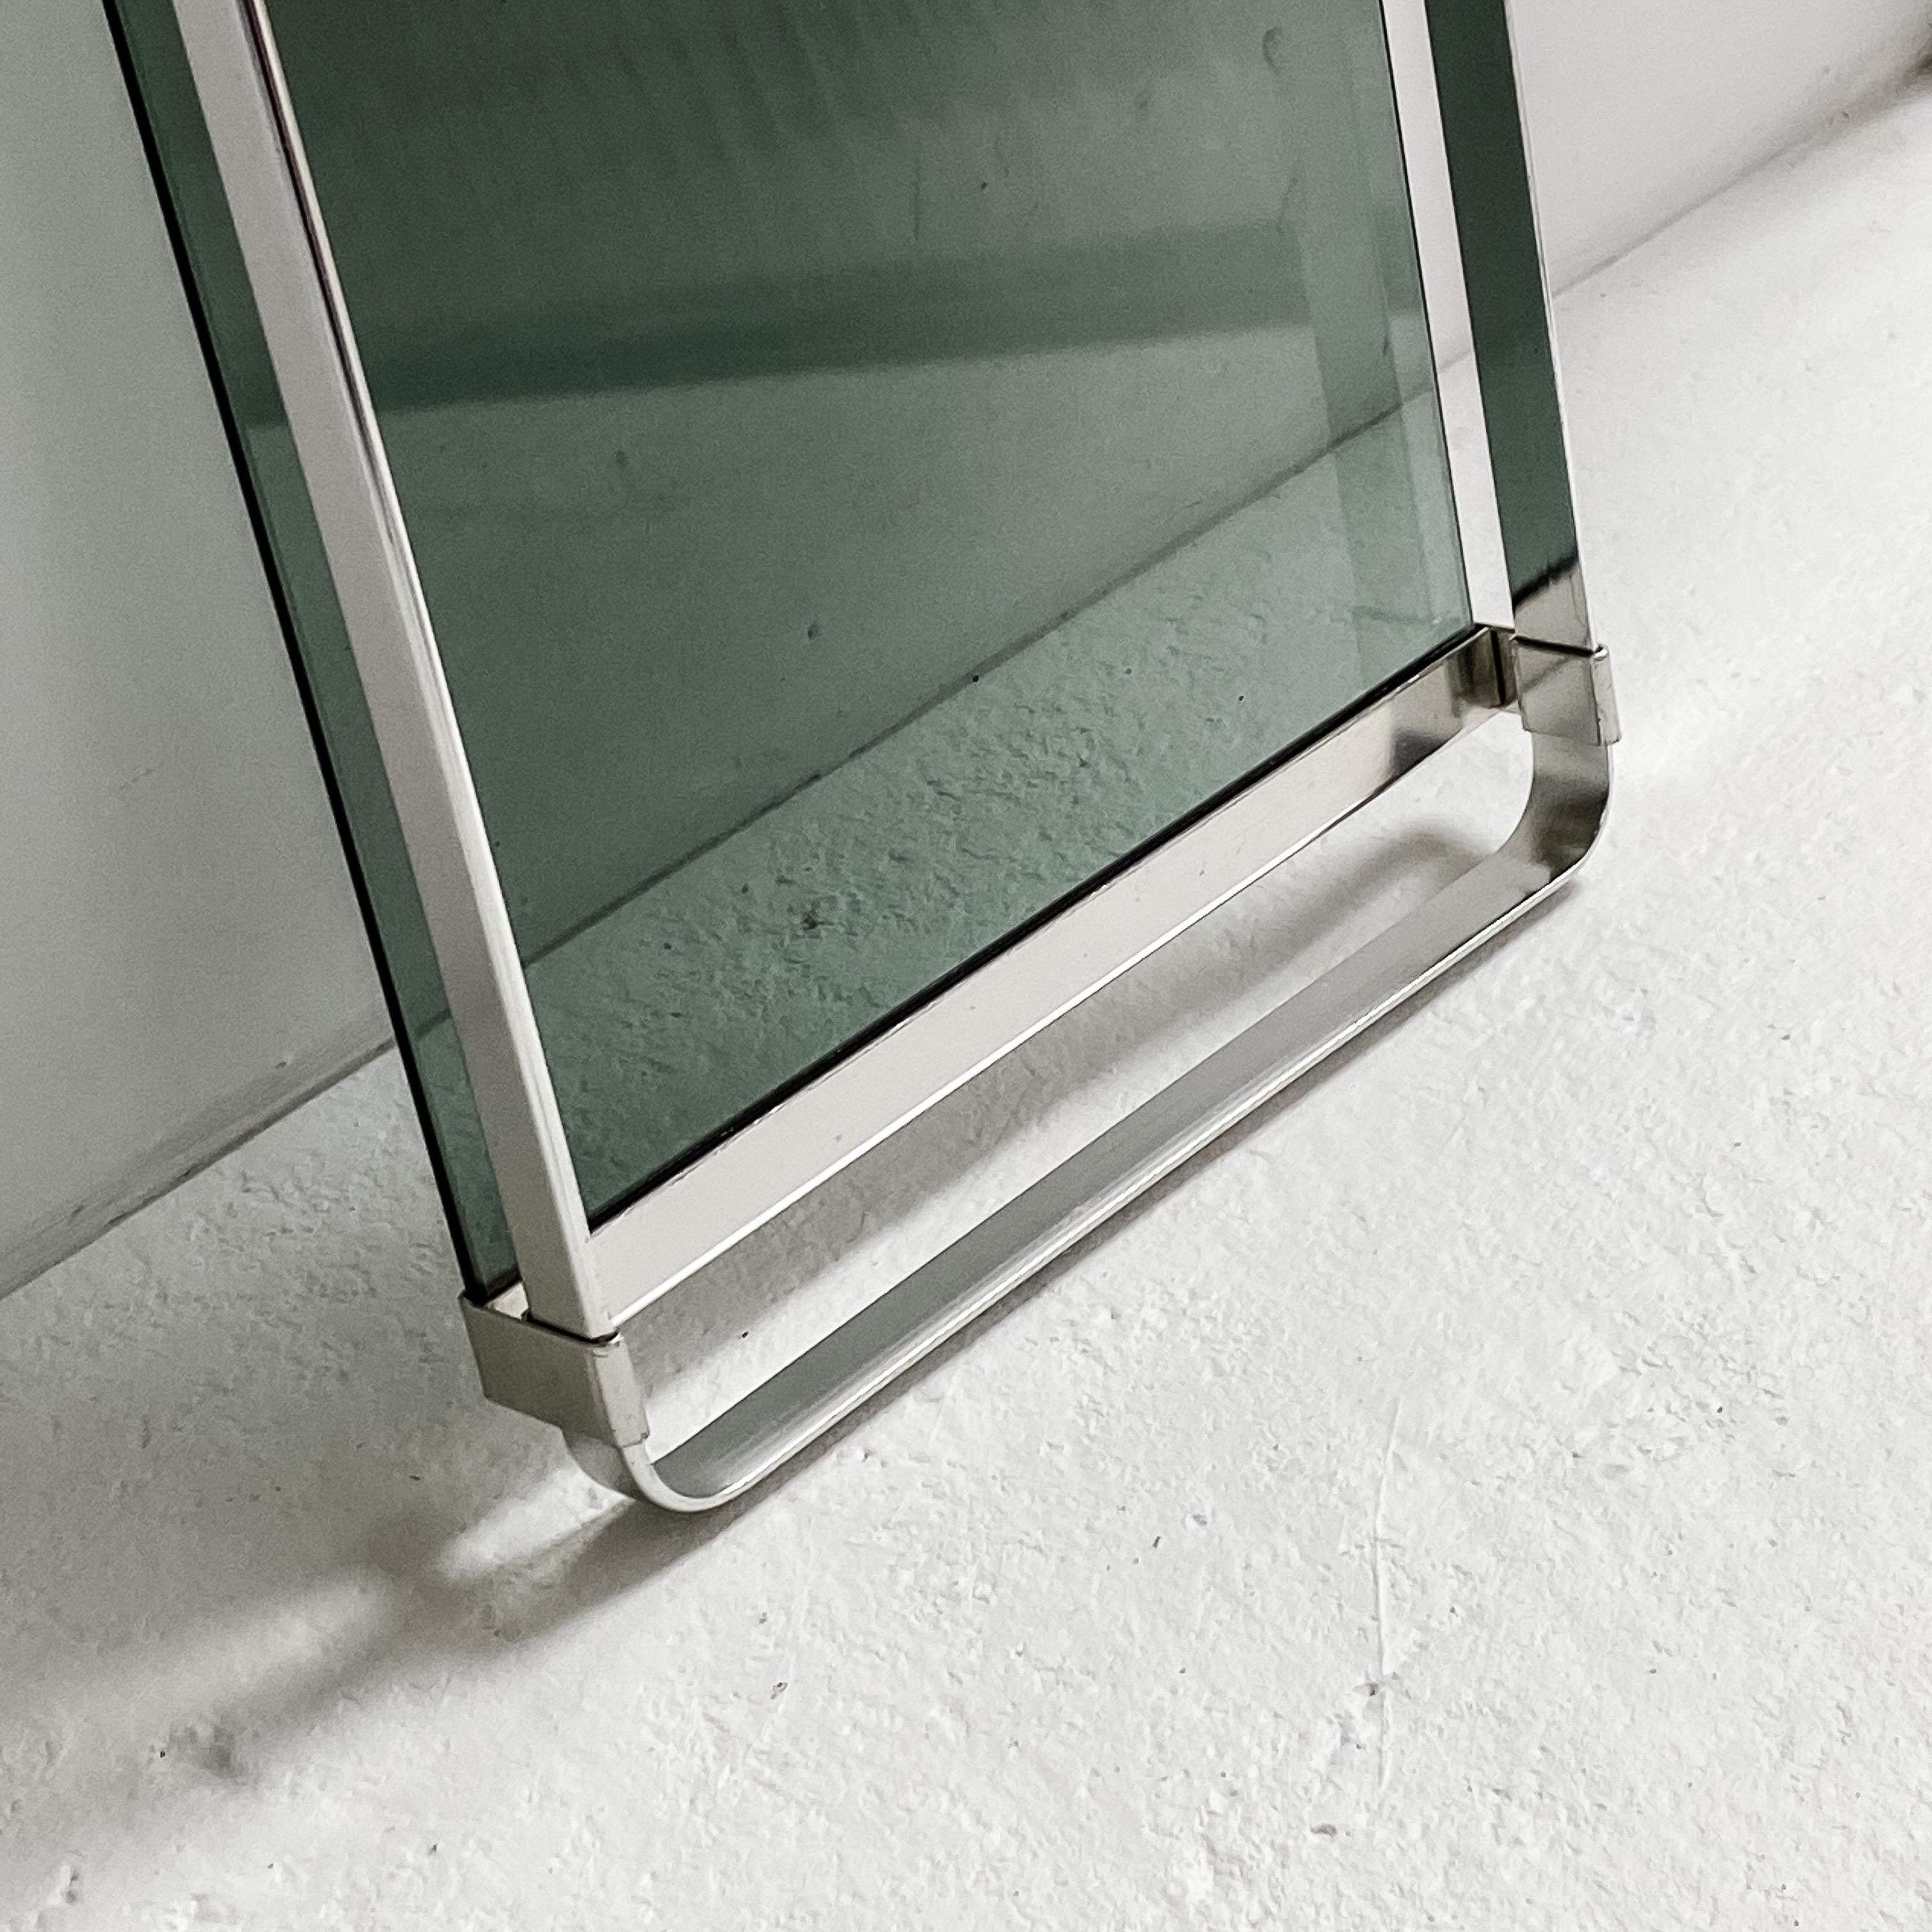 Glamour and stylish serving tray by MB Italy. Typical sleek seventies design, executed in aluminium and grey/greenish smoke glass. Only minor traces of use, still with its original label underneath.
Perfect item for serving cocktails or morning